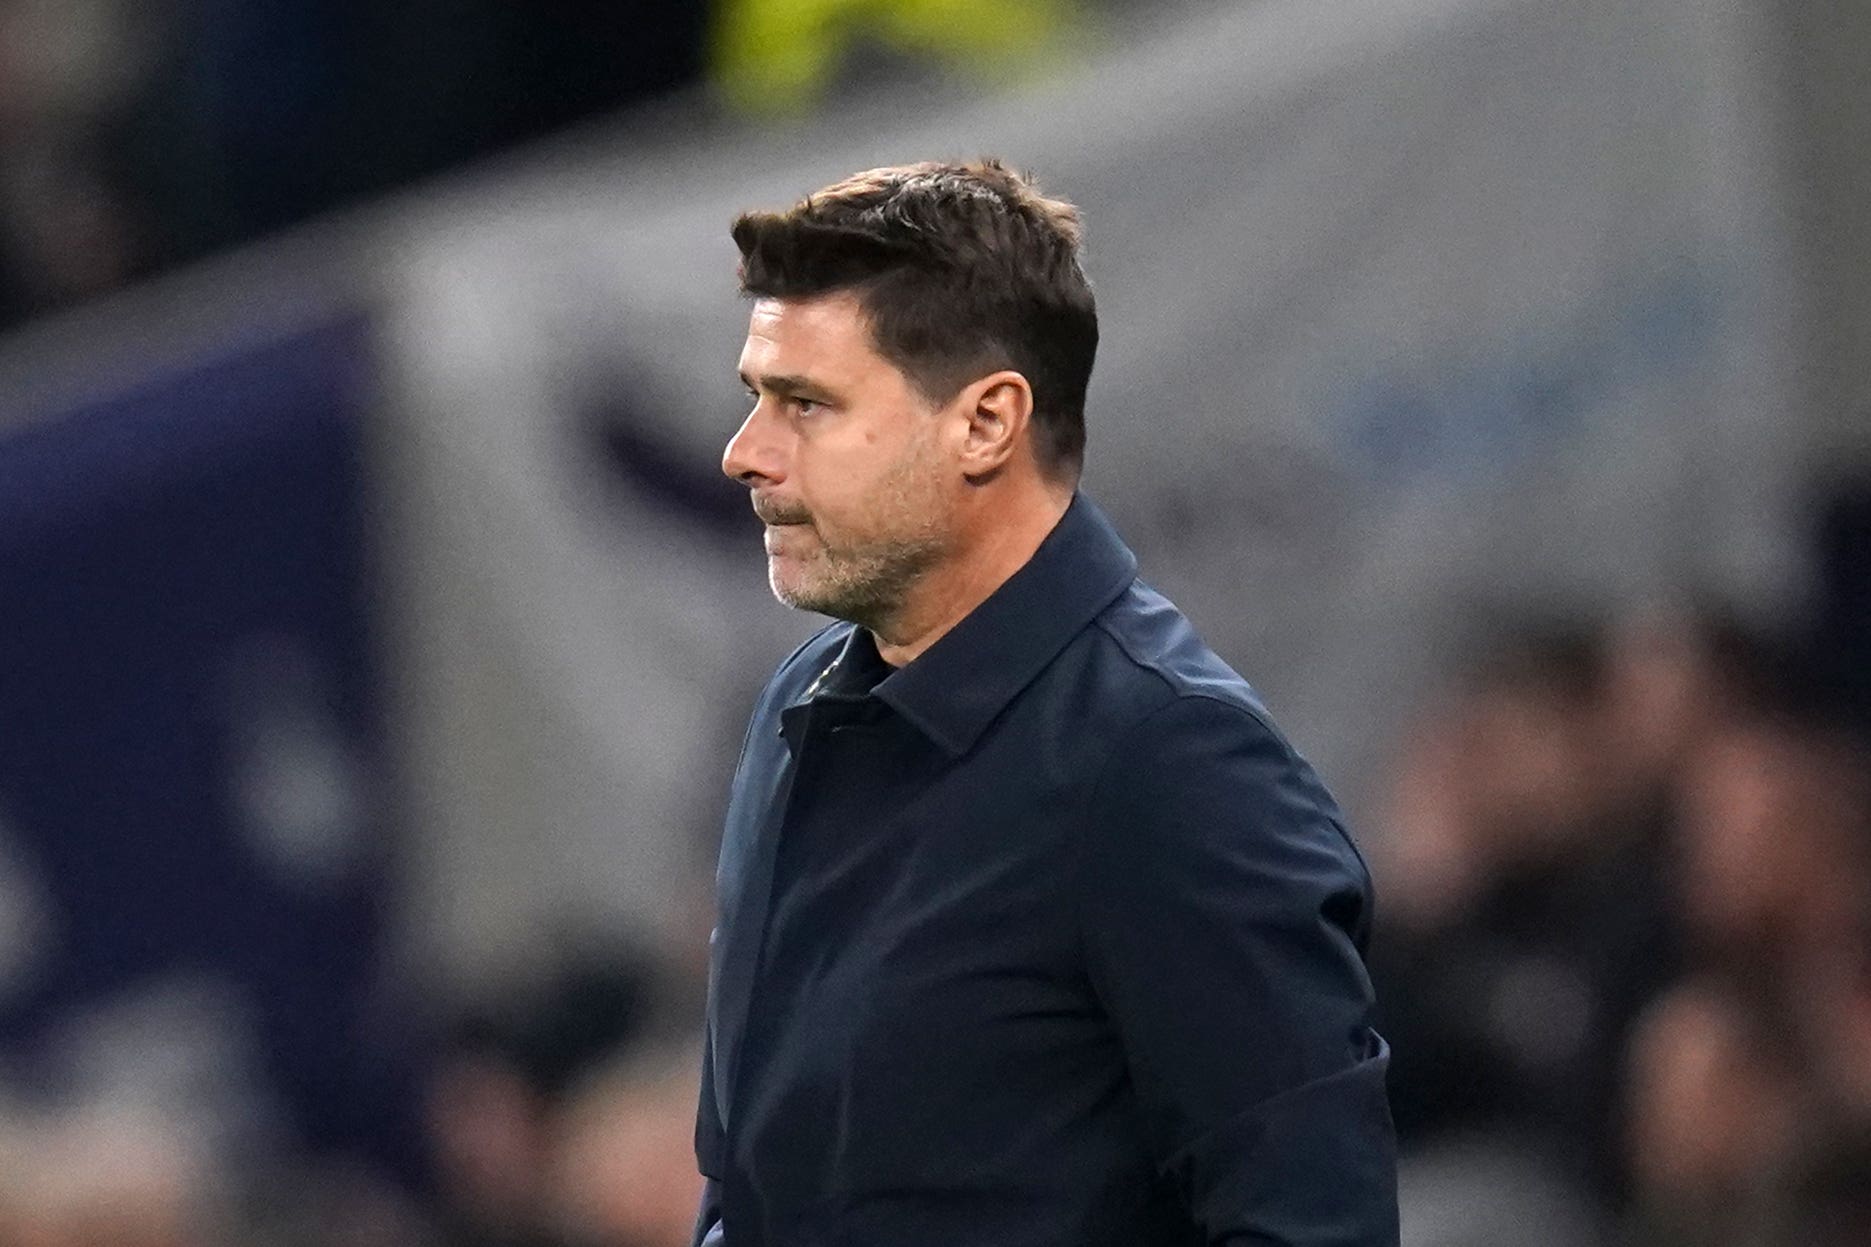 Mauricio Pochettino said it is easier for new players to settle at Manchester City than at Chelsea under the current circumstances (John Walton/PA)